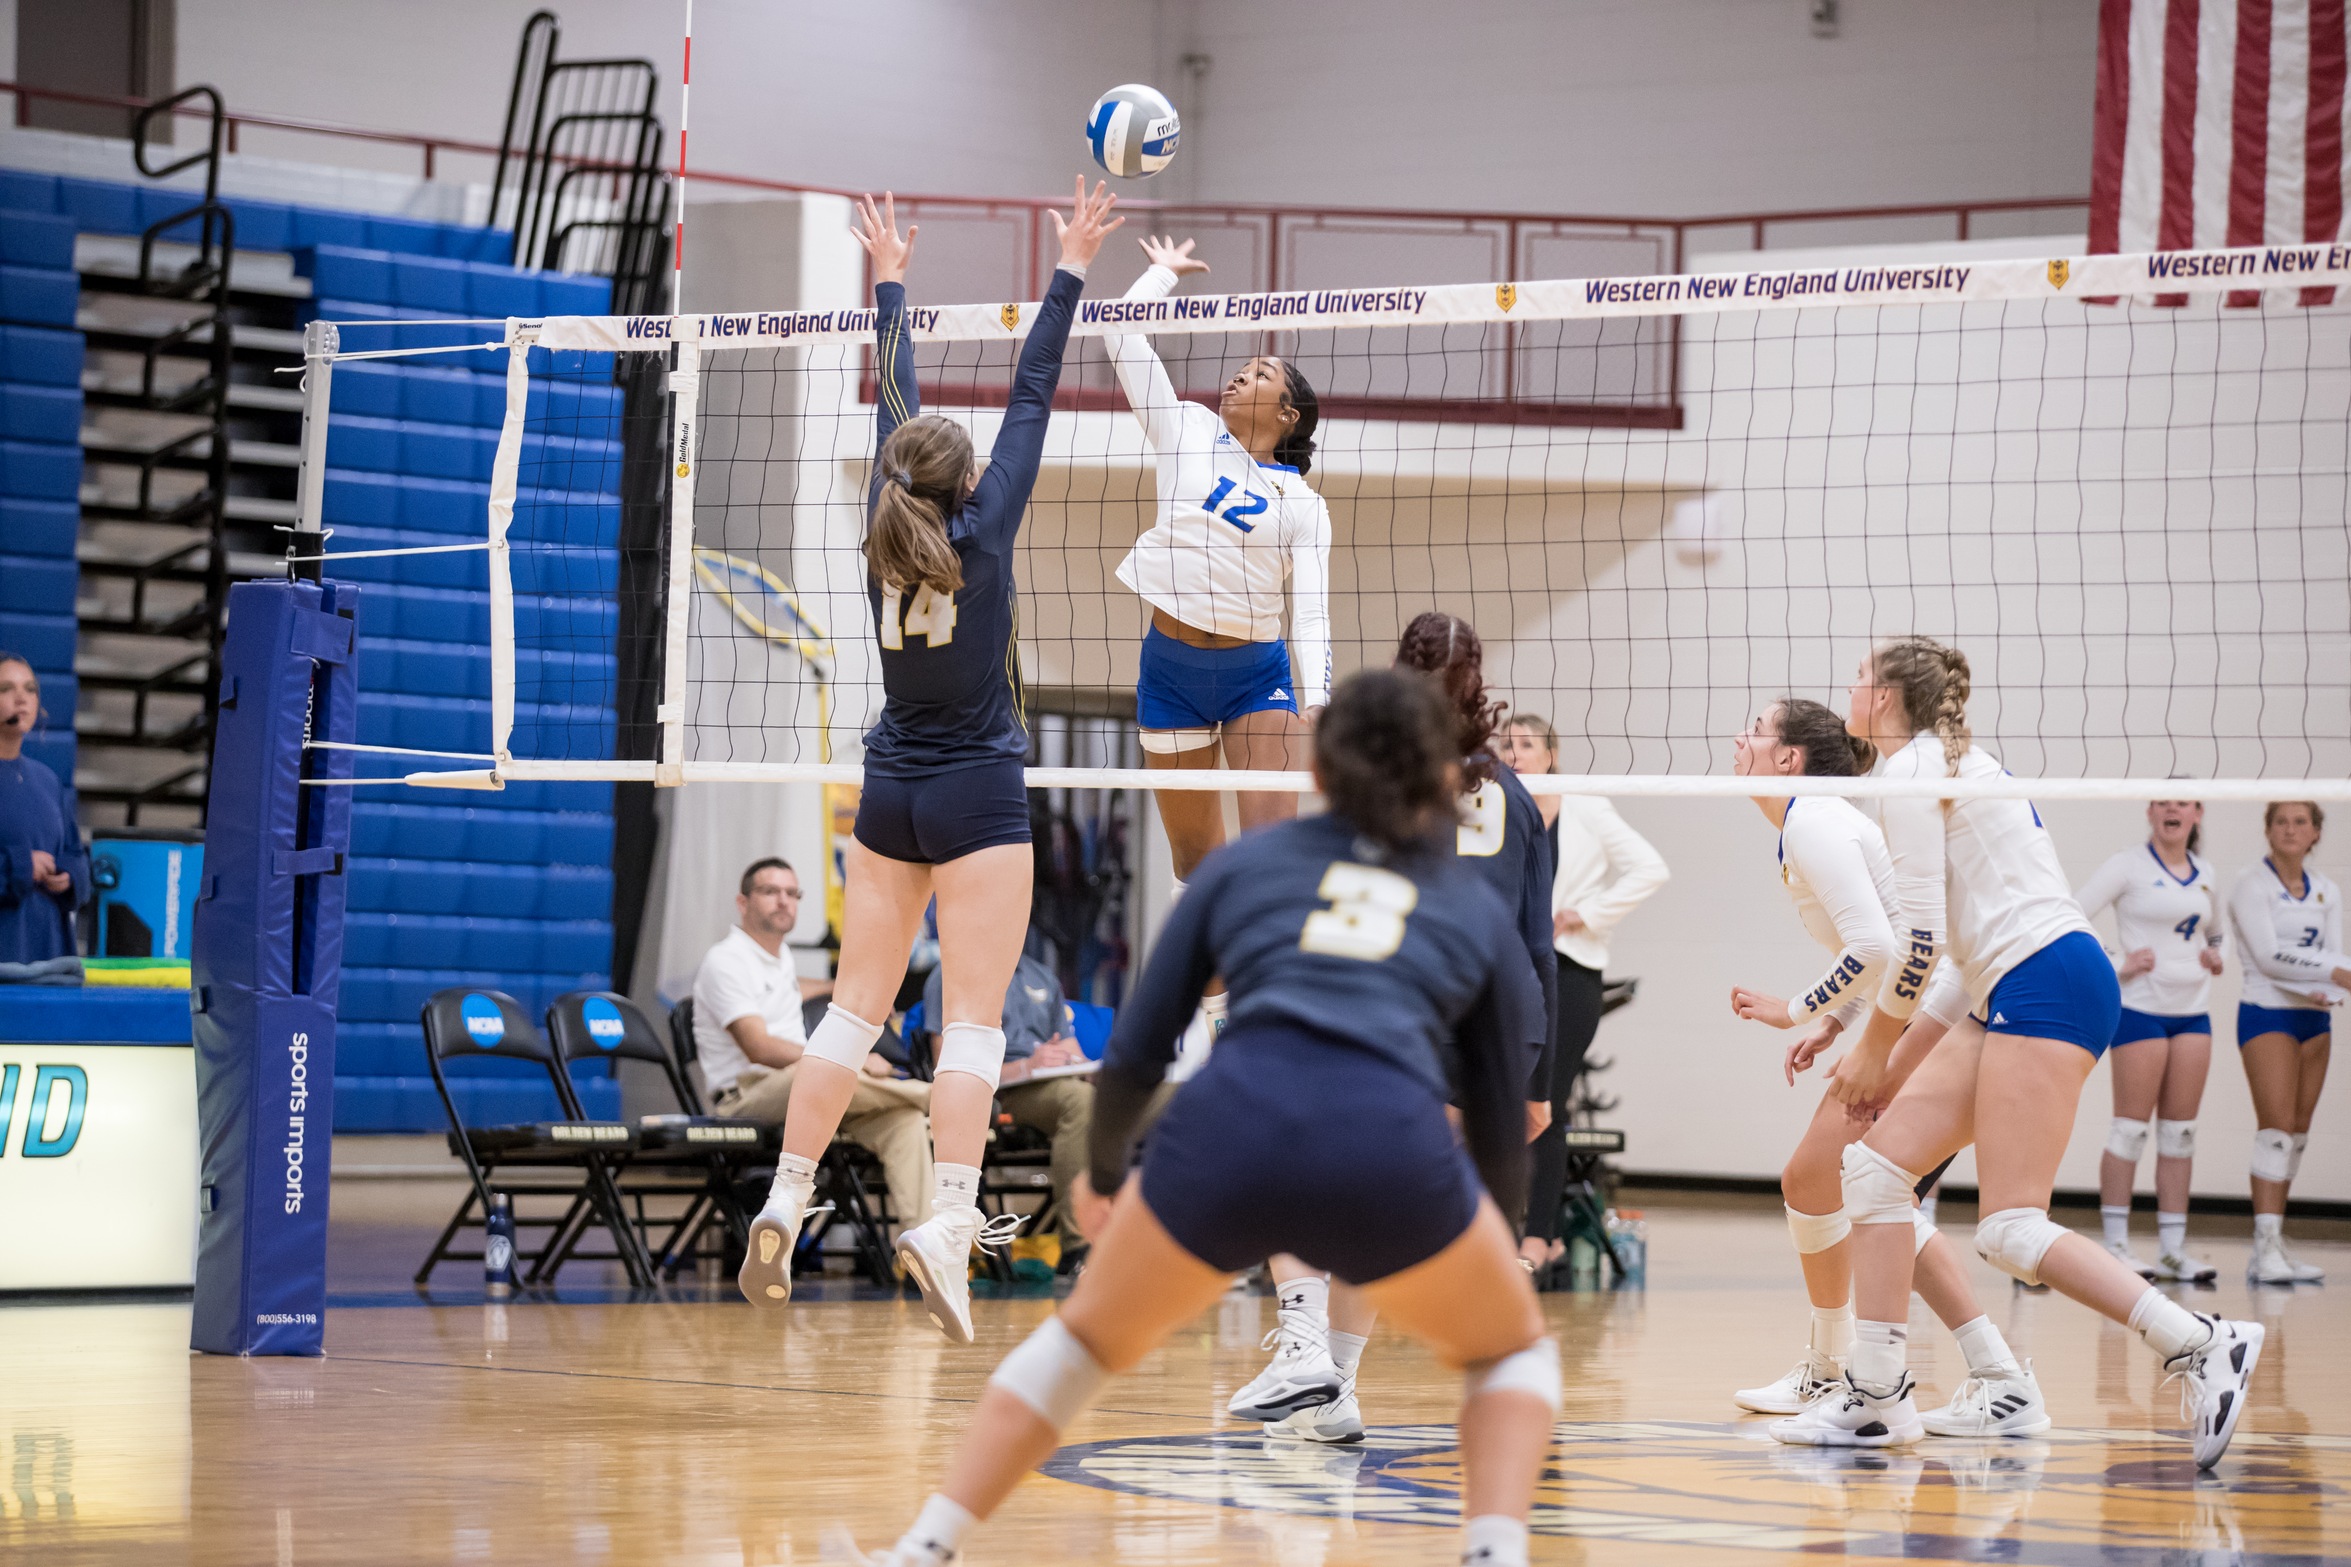 Molina, Hawes, Long, &amp; Scott Record Double Digit Kills in CCC Quarterfinal Upset Win over Wentworth